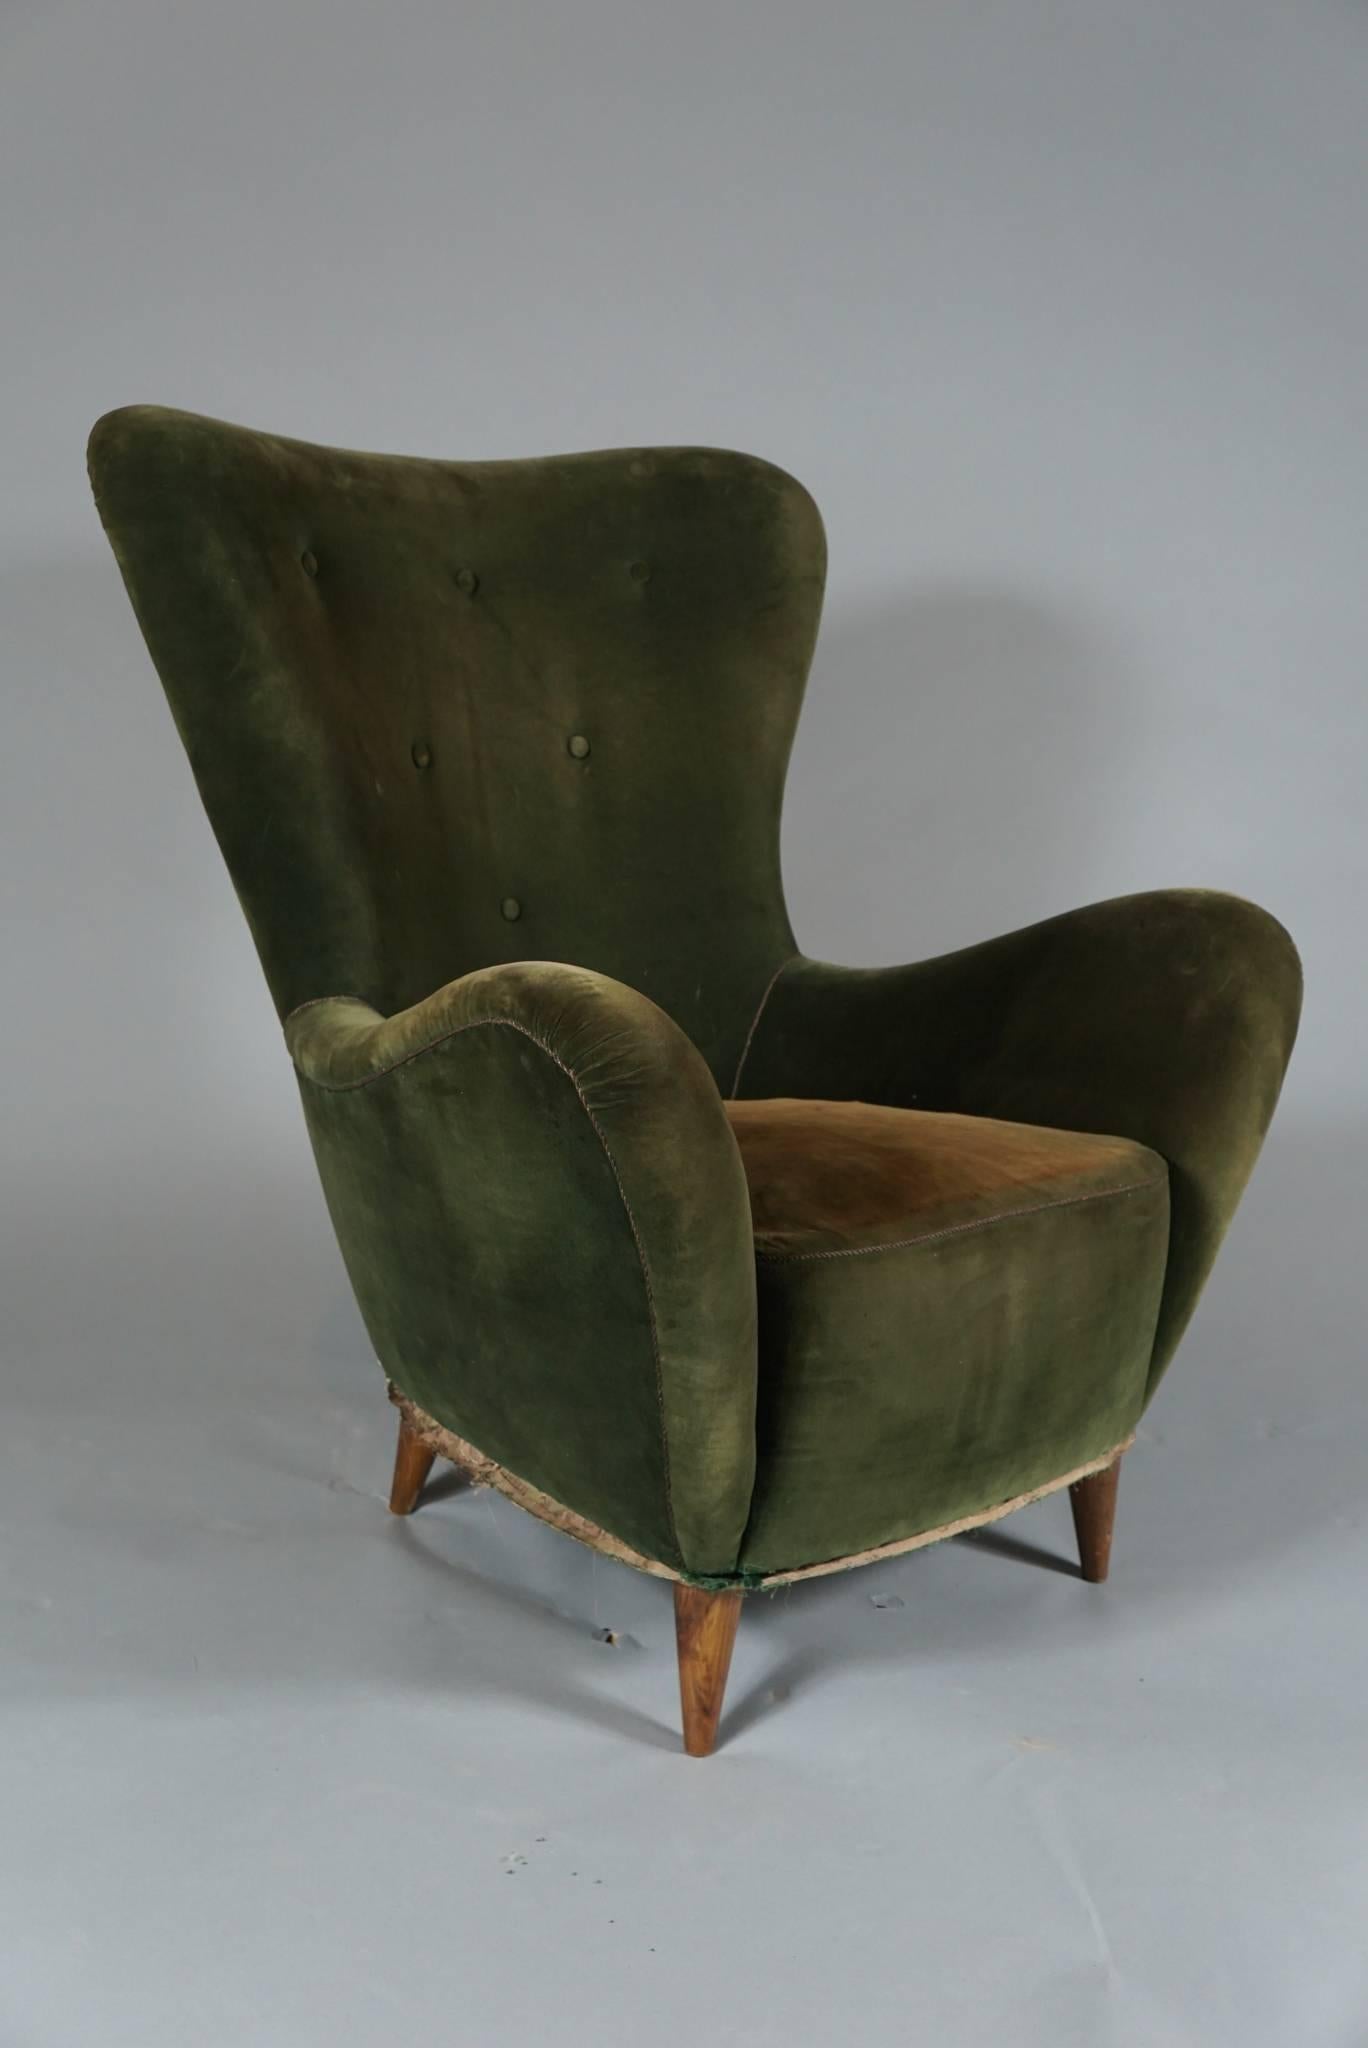 Stylish pair of Mid-Century Modern chairs
Upholstered in a beautiful dark green velvet
Button decoration and flared arms.